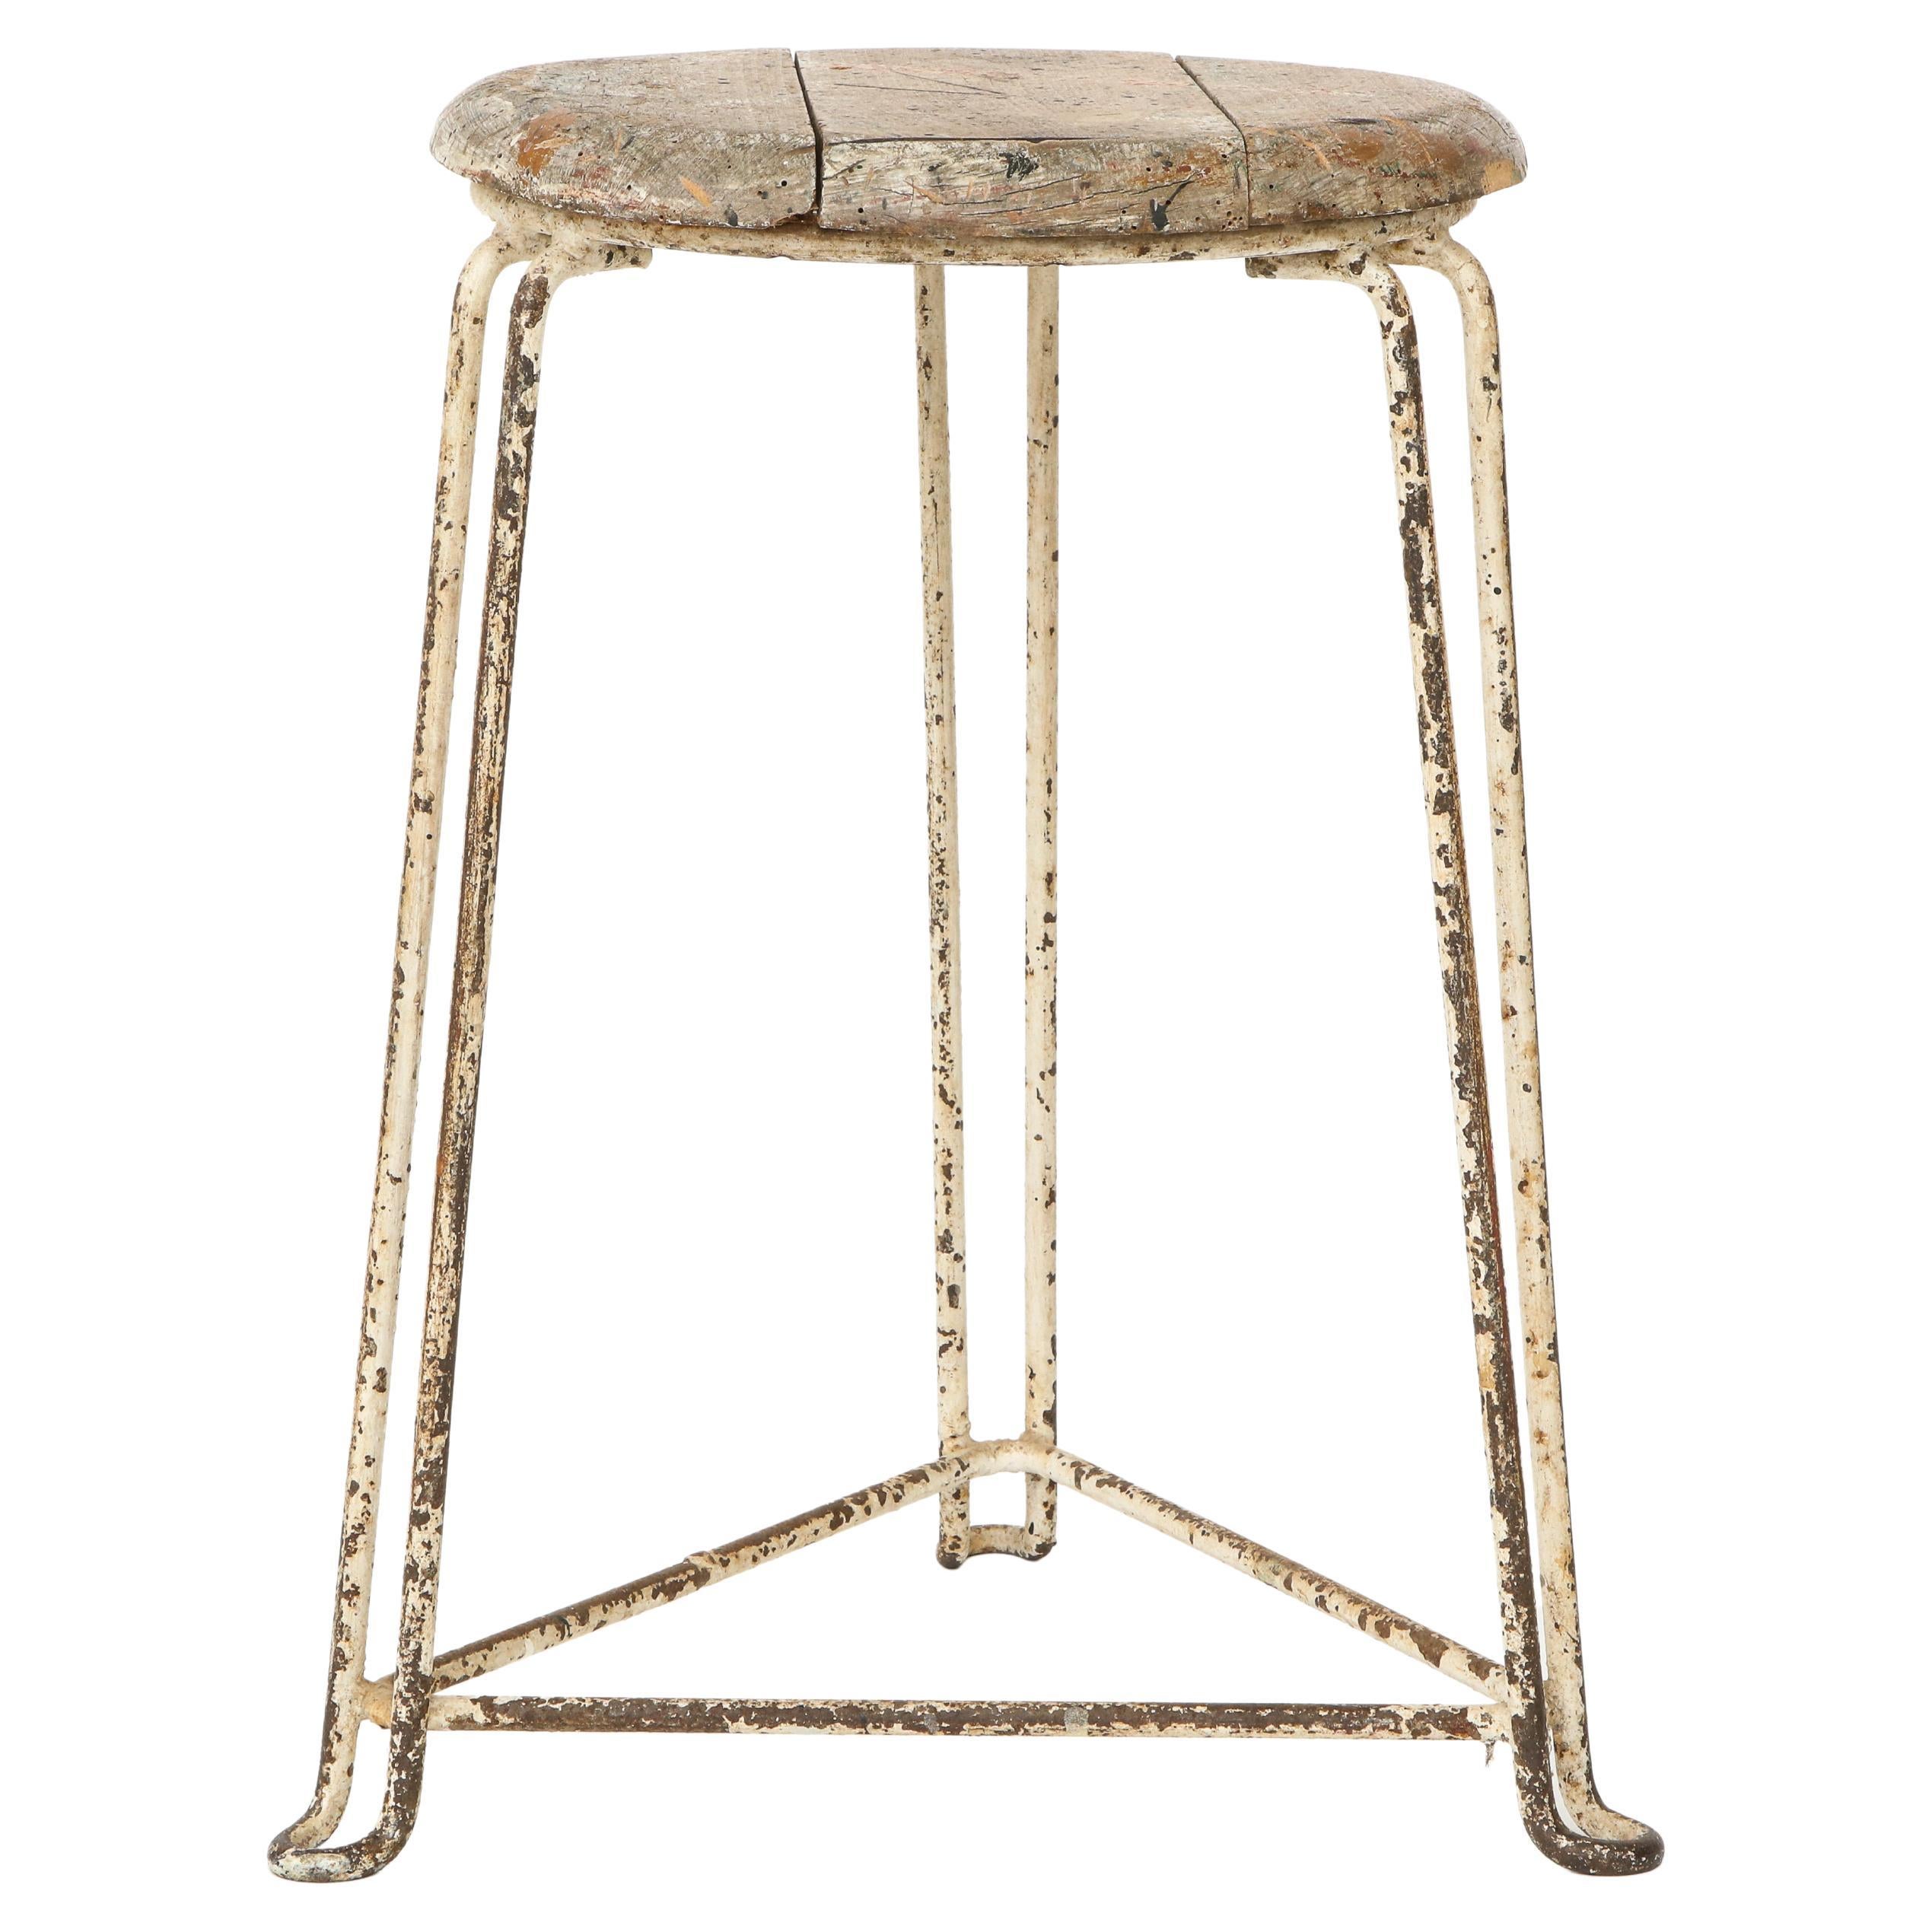 Wood and Metal Modern Industrial Vintage Stool, Heavy Patina, Belgium 1940's For Sale